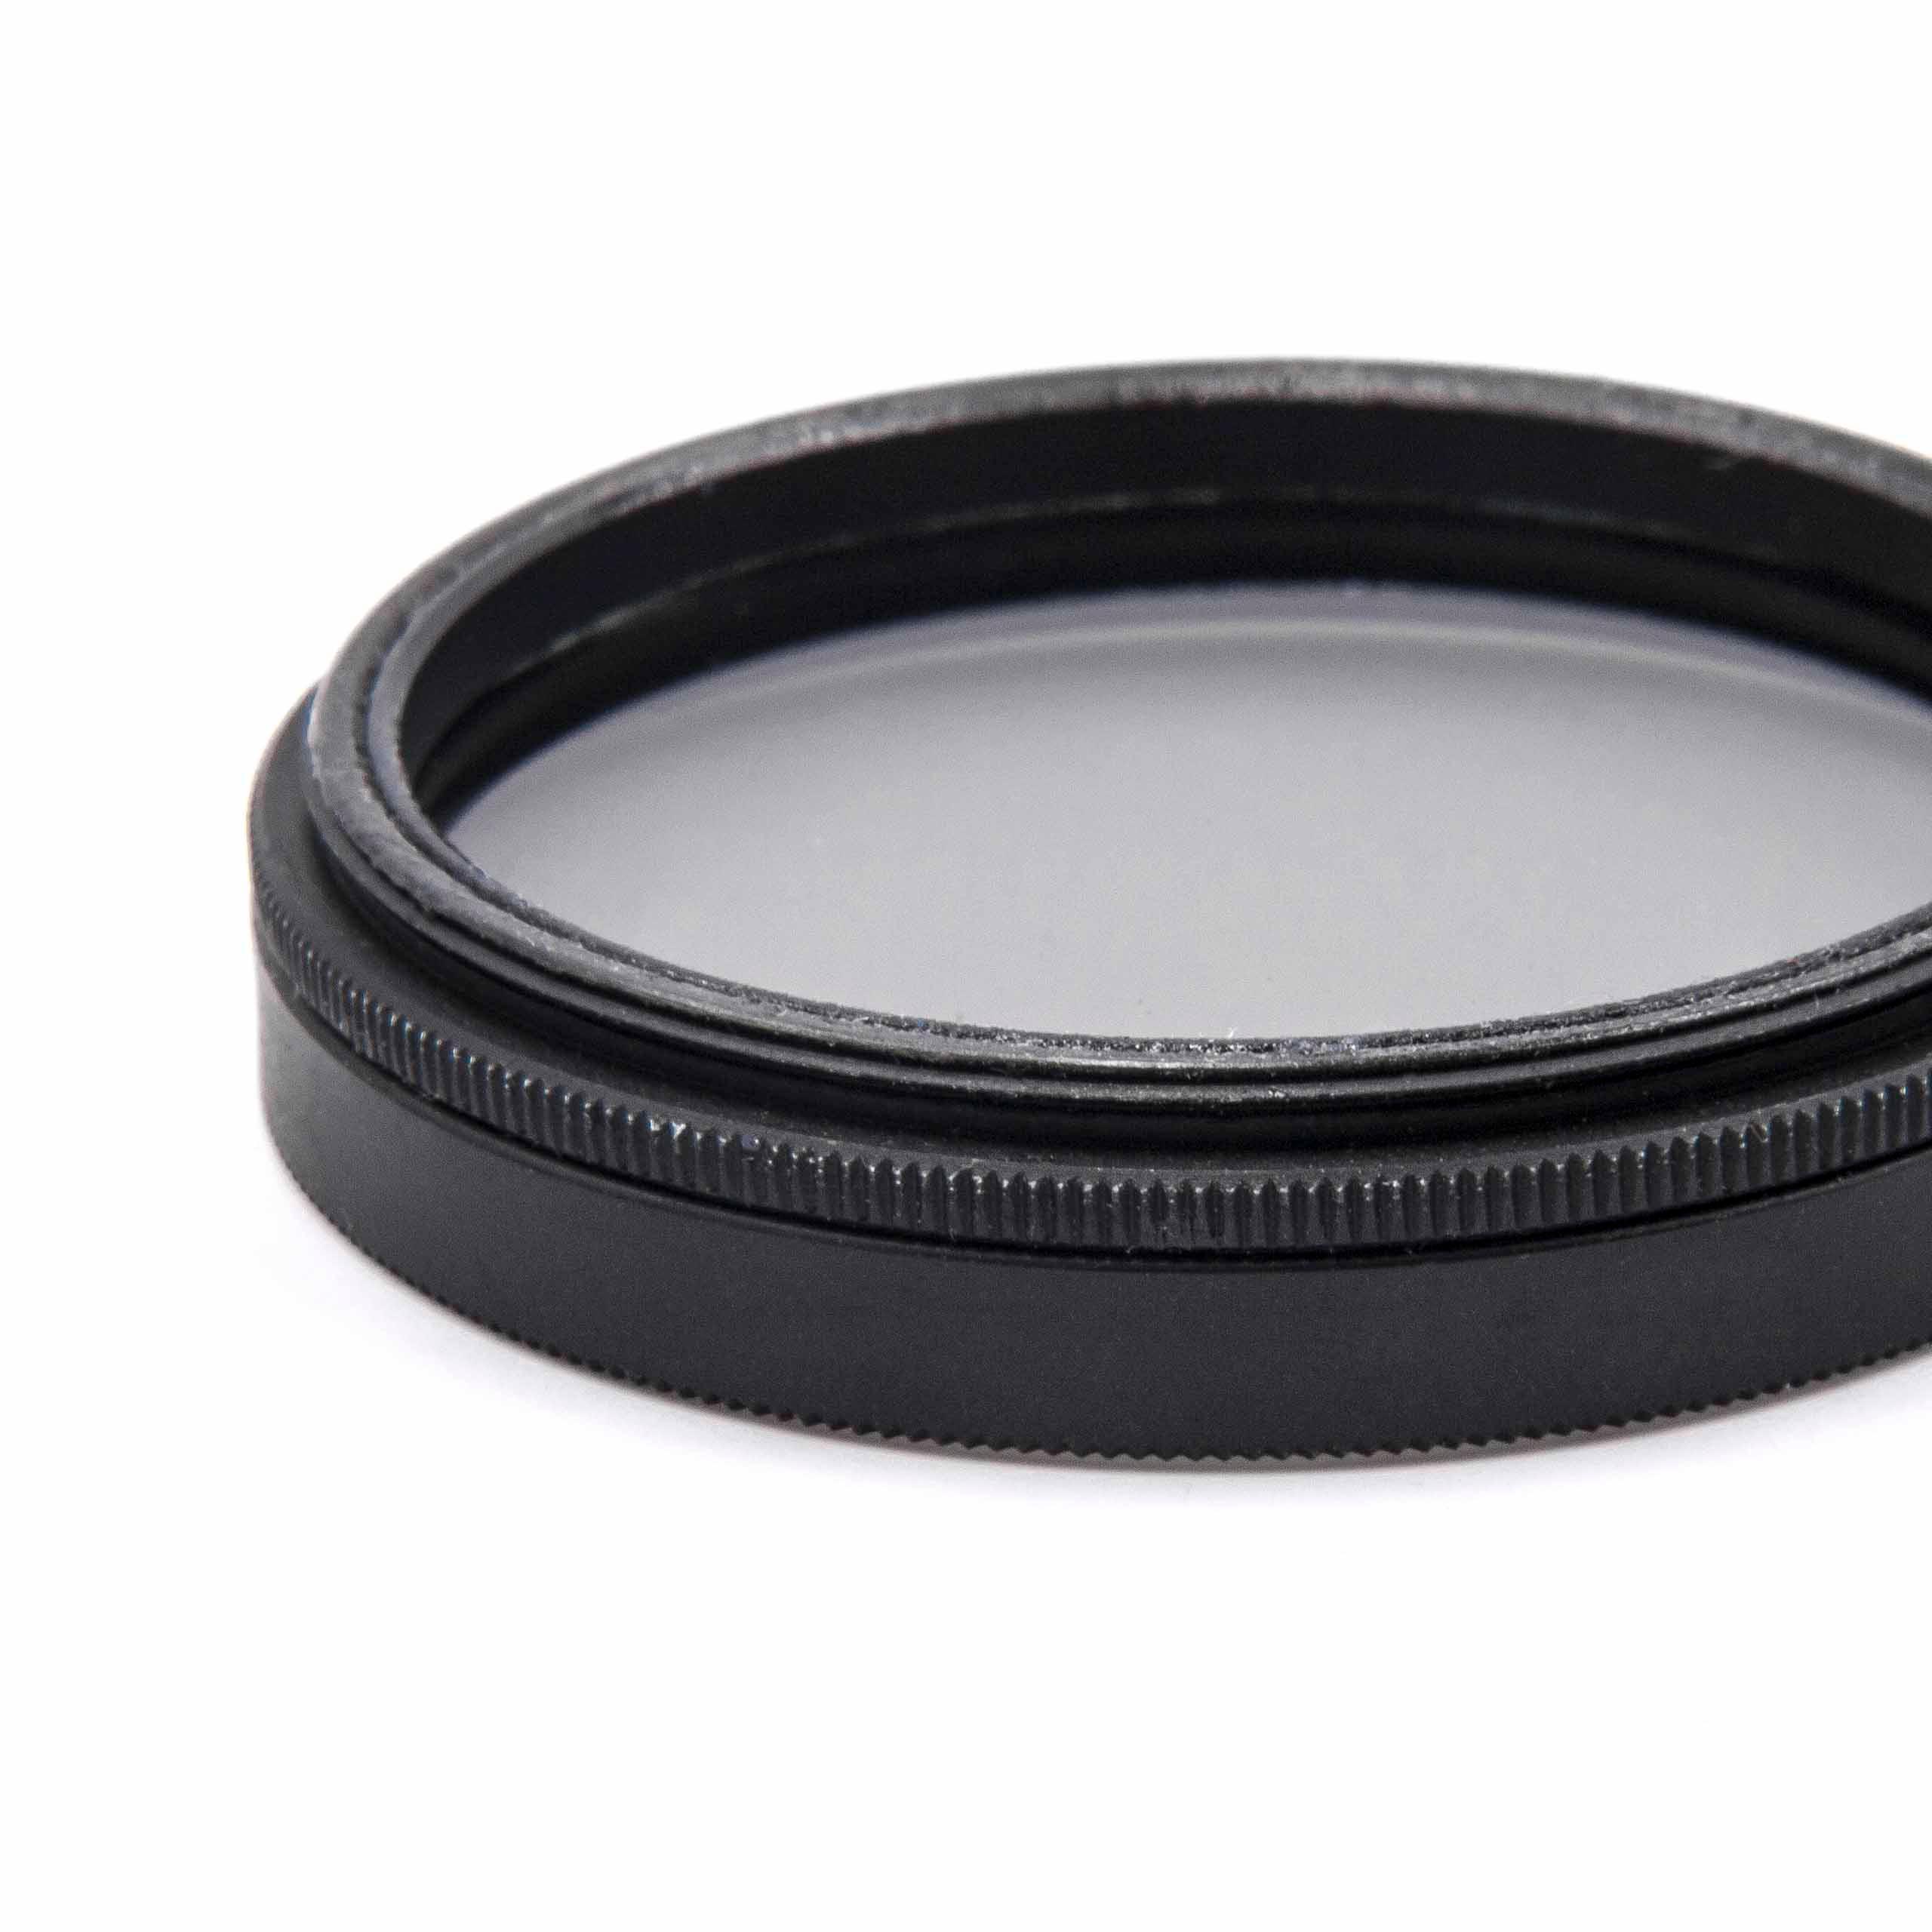 Polarising Filter suitable for Cameras & Lenses with 43 mm Filter Thread - CPL Filter